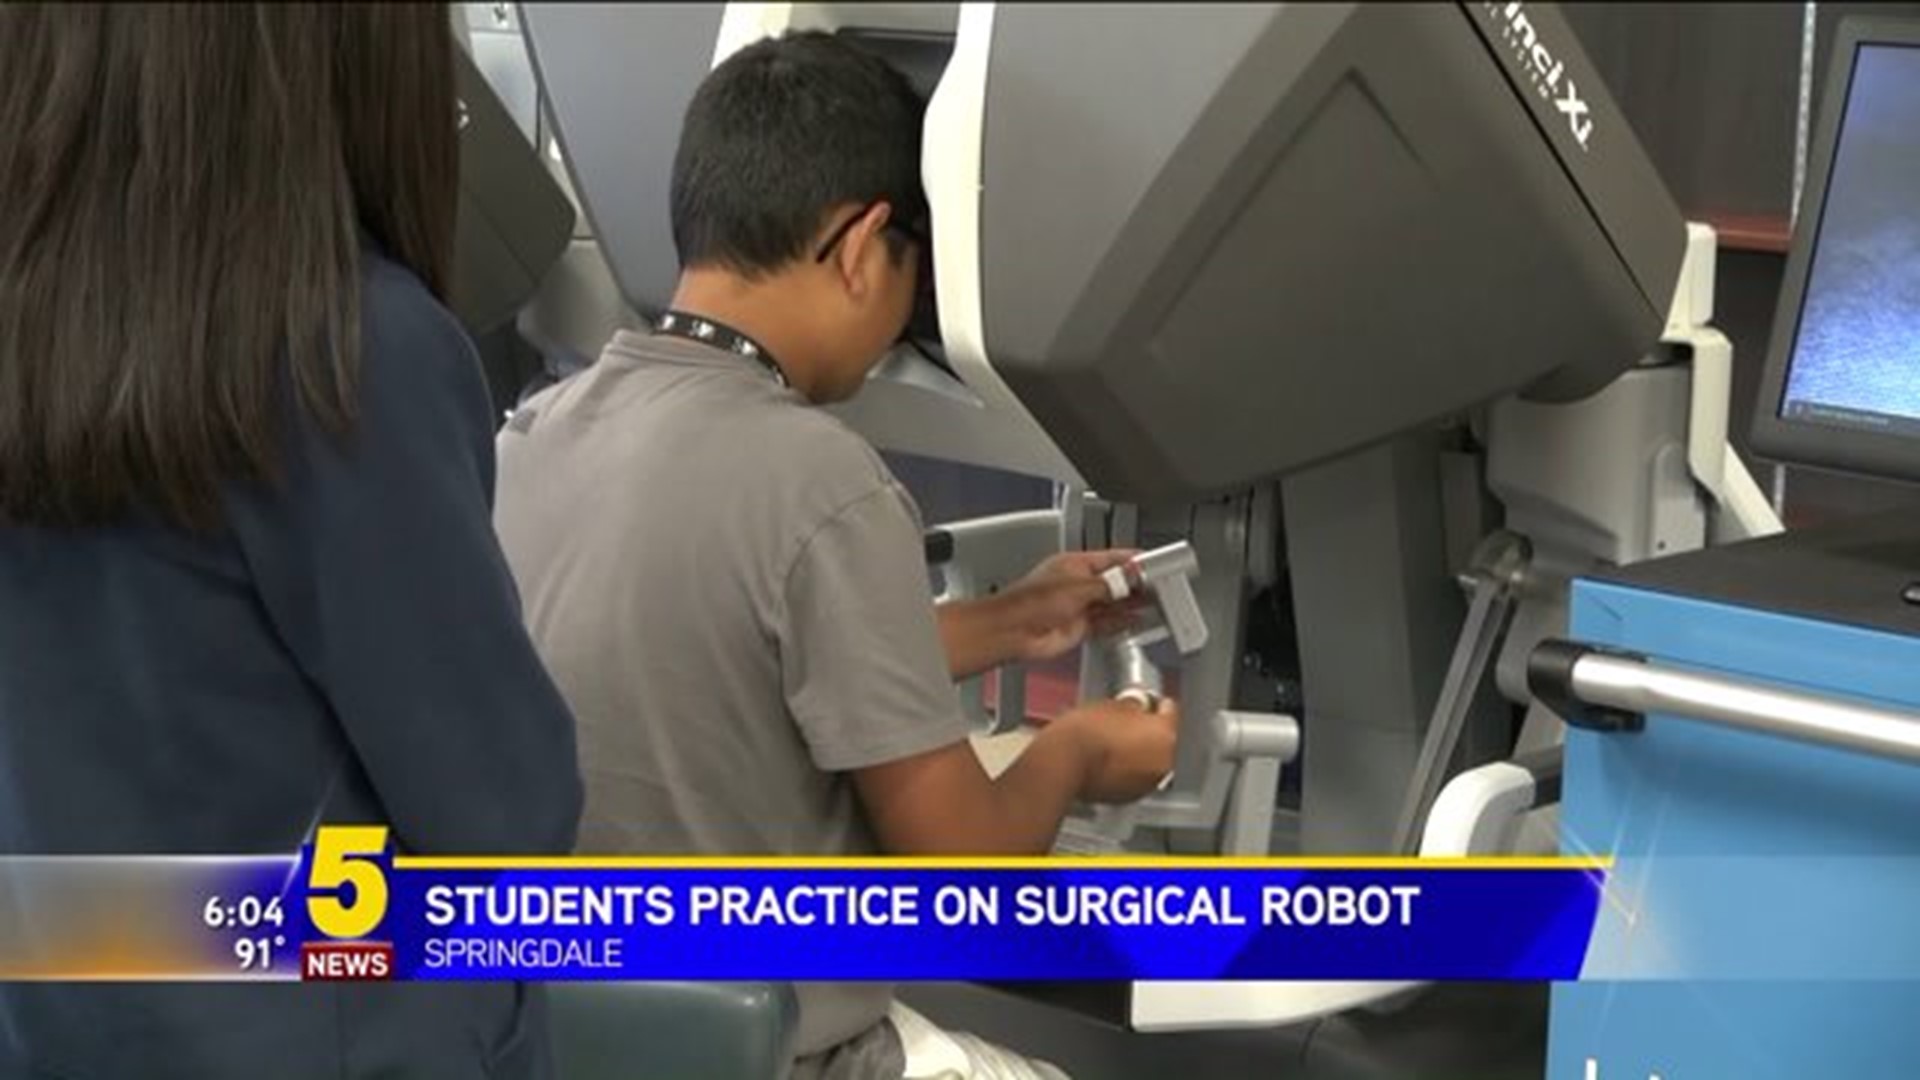 STUDENTS USE SURGICAL ROBOT